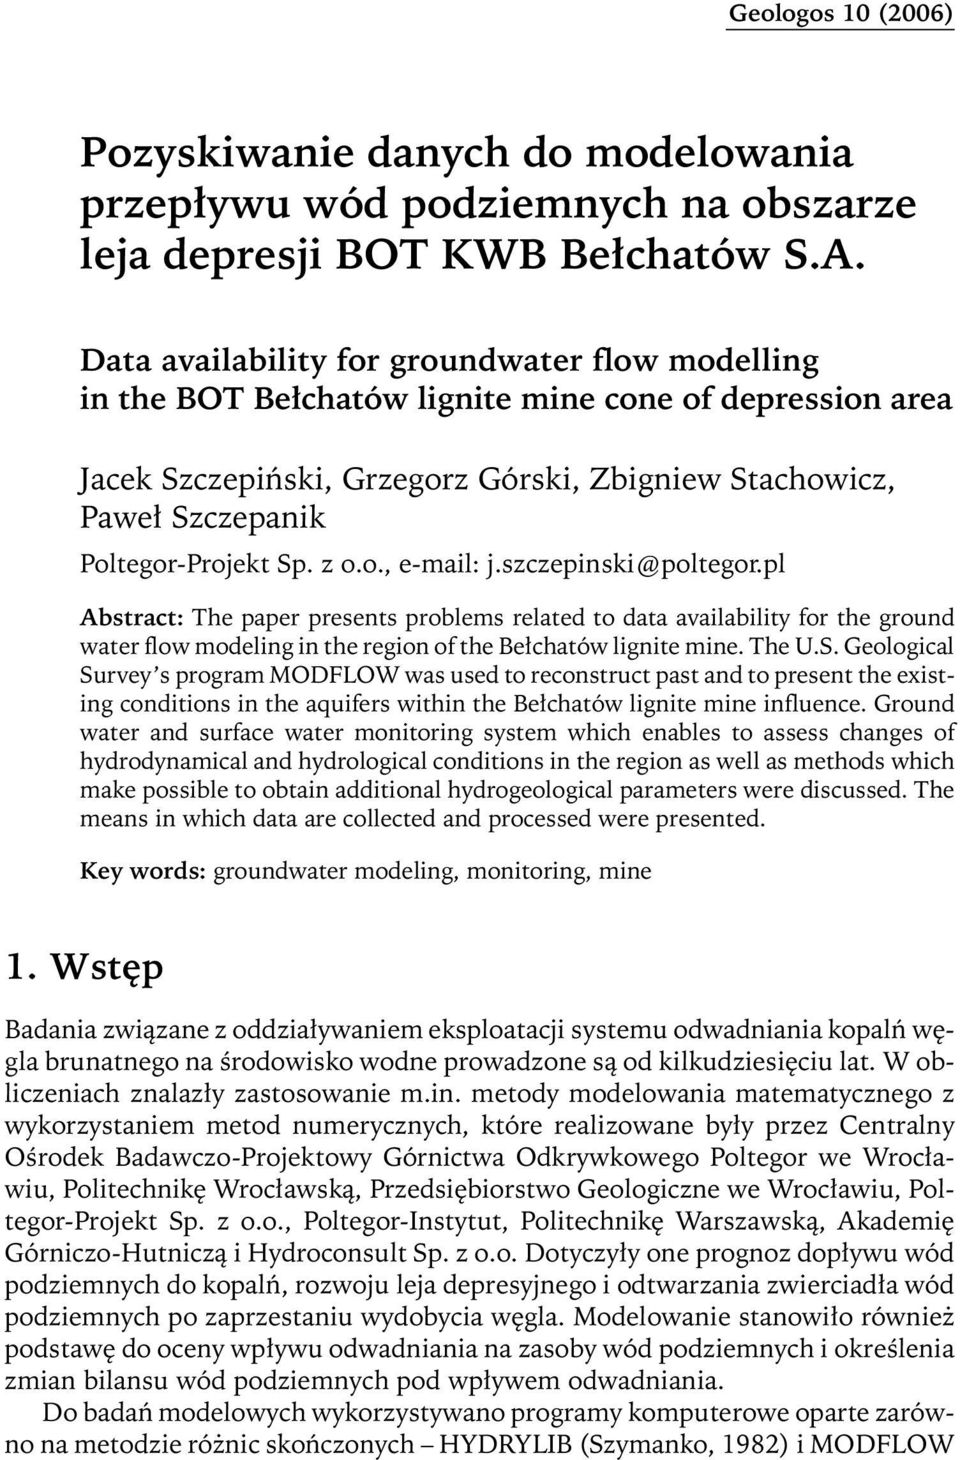 Sp. z o.o., e-mail: j.szczepinski@poltegor.pl Abstract: The paper presents problems related to data availability for the ground water flow modeling in the region of the Bełchatów lignite mine. The U.